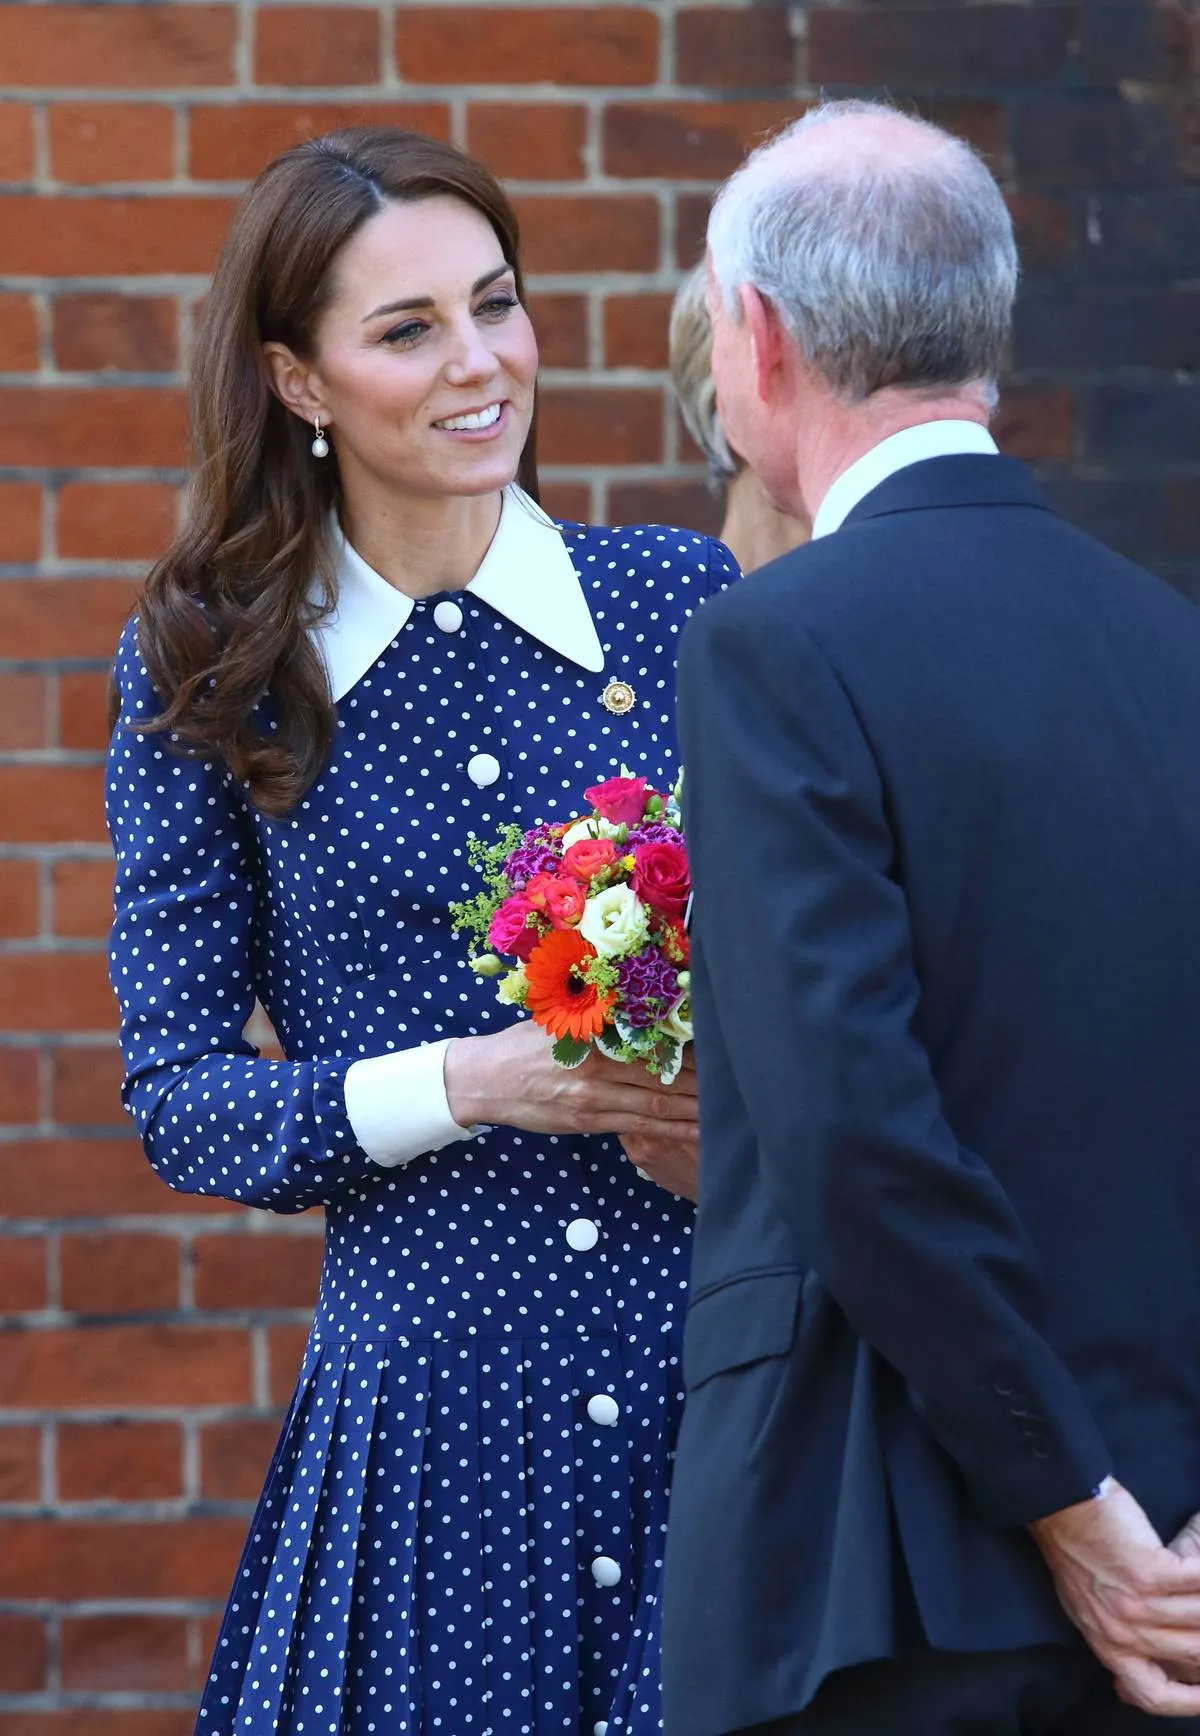 Kate Middleton speaks to a man while wearing a blue polka dot dress with a white collar.